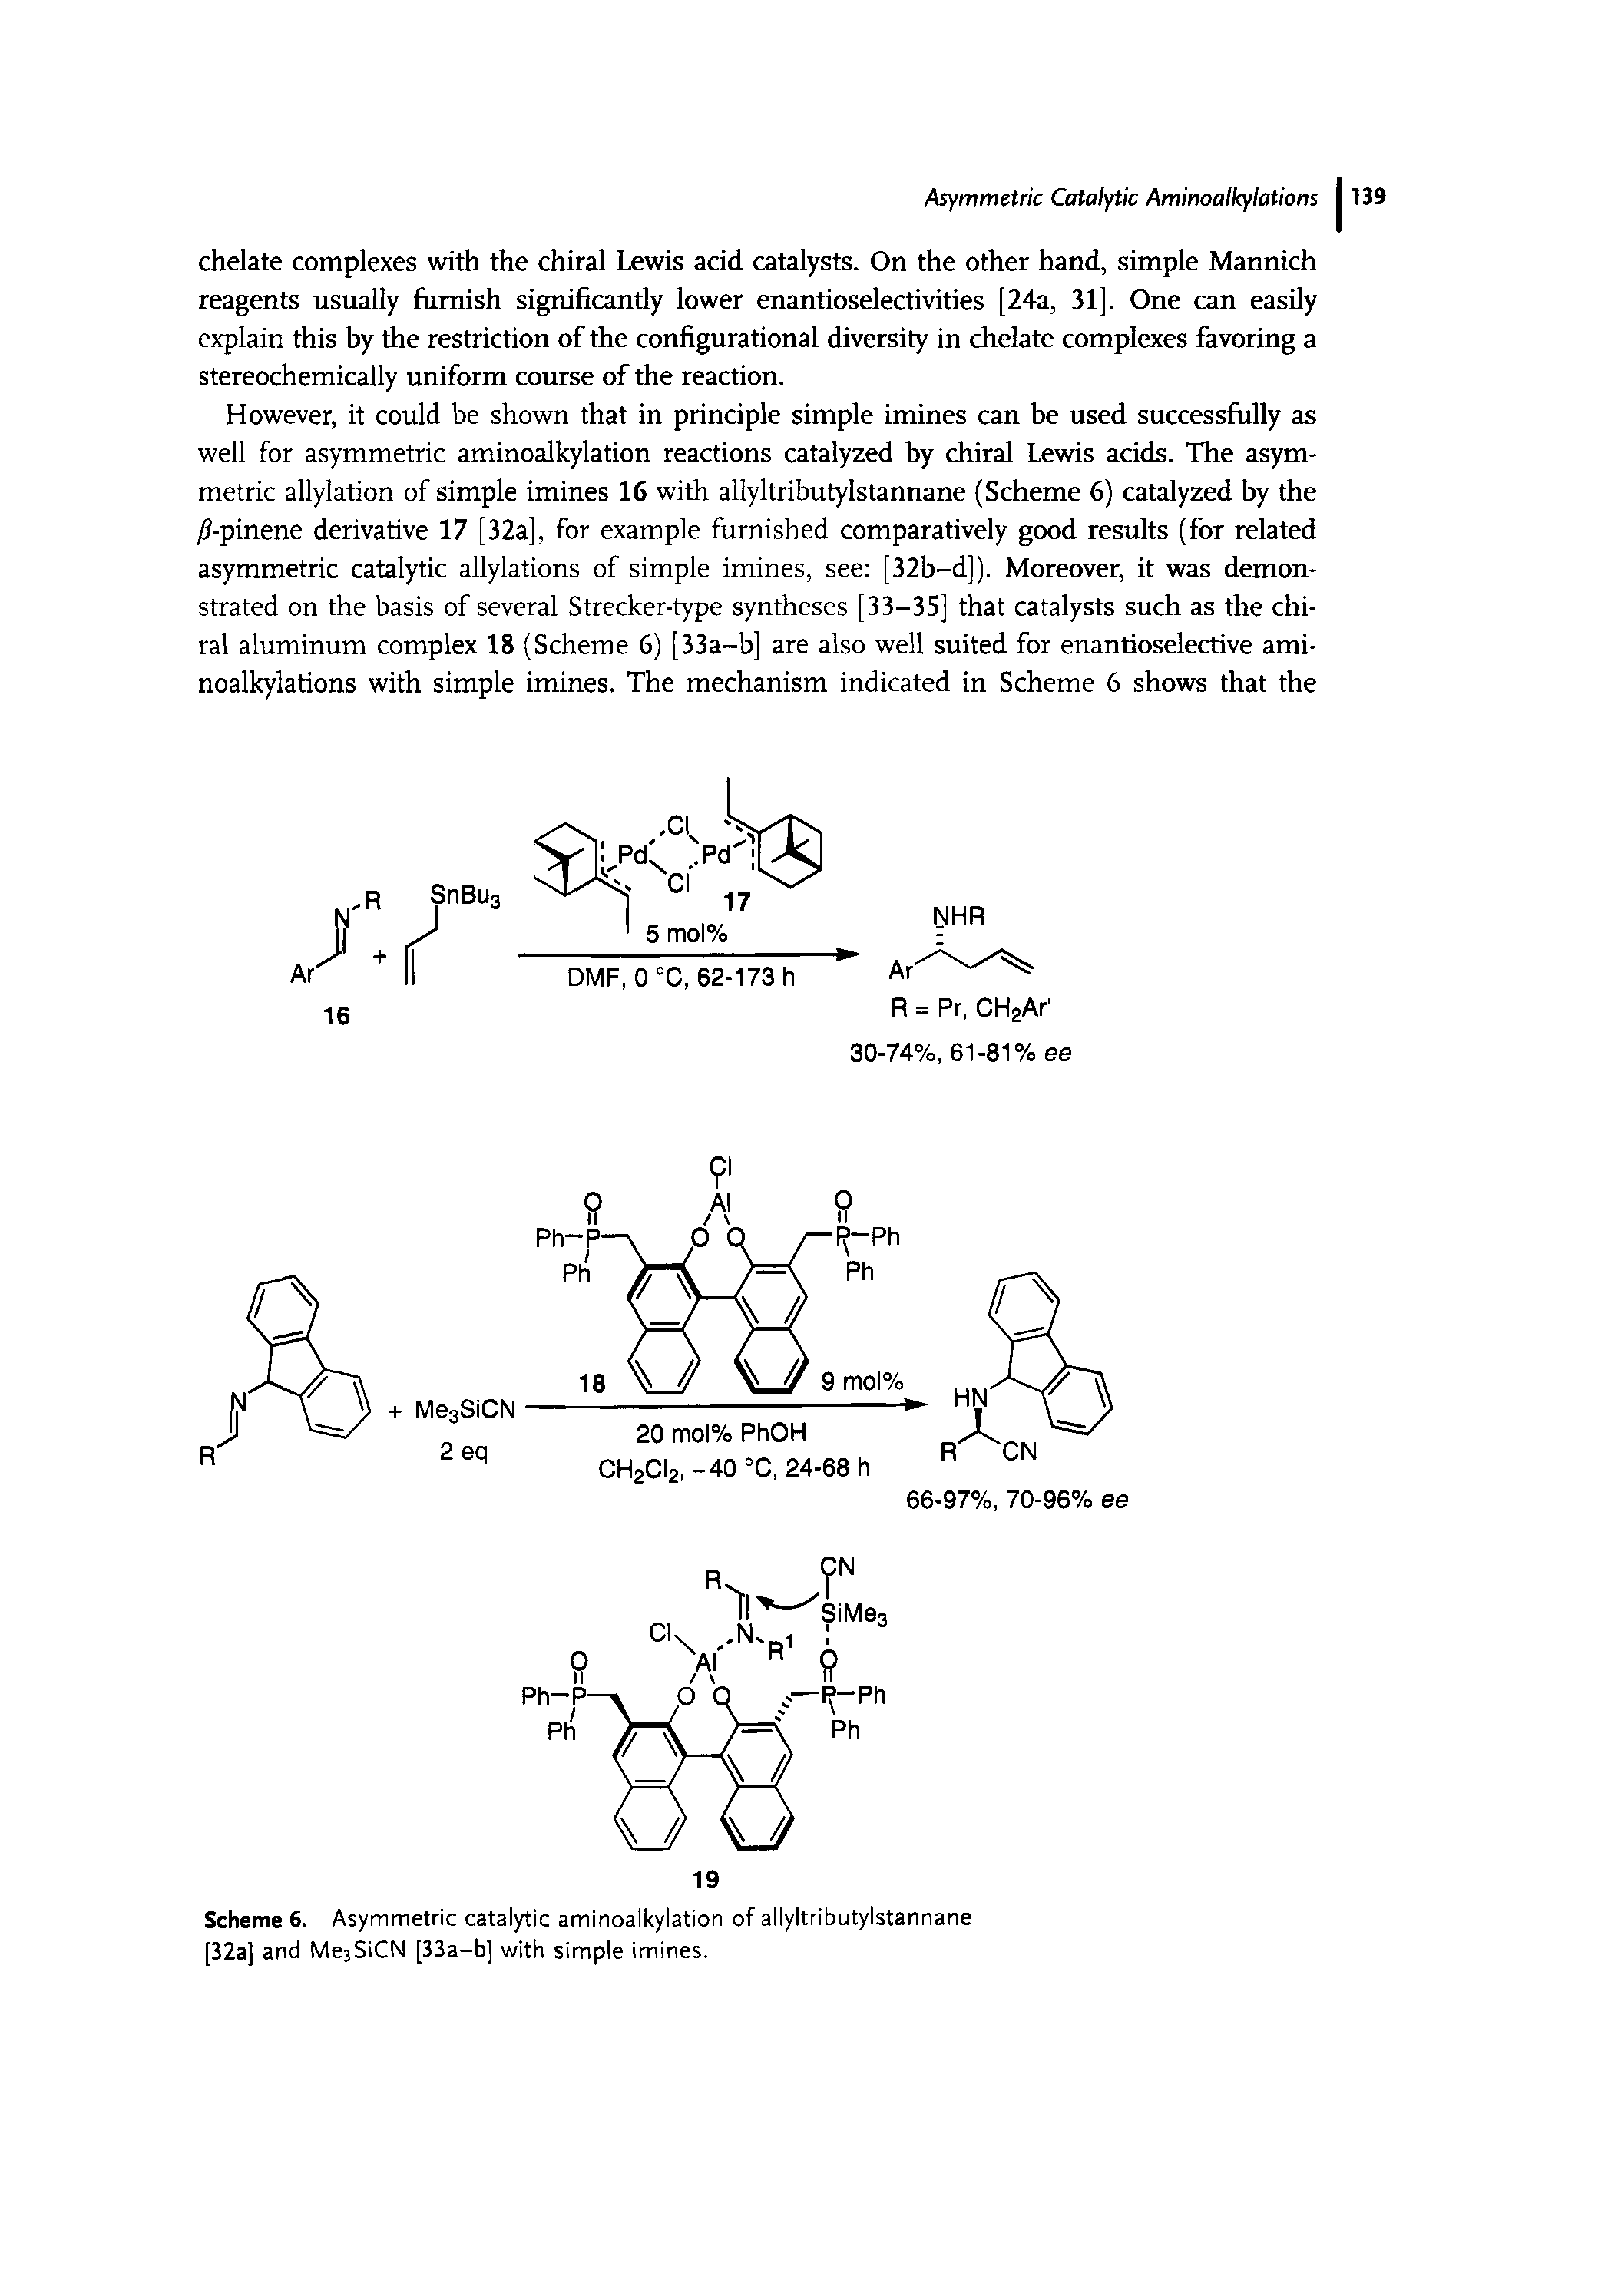 Scheme 6. Asymmetric catalytic aminoalkylation of allyltributylstannane [32a] and MejSiCN [33a—b] with simple imines.